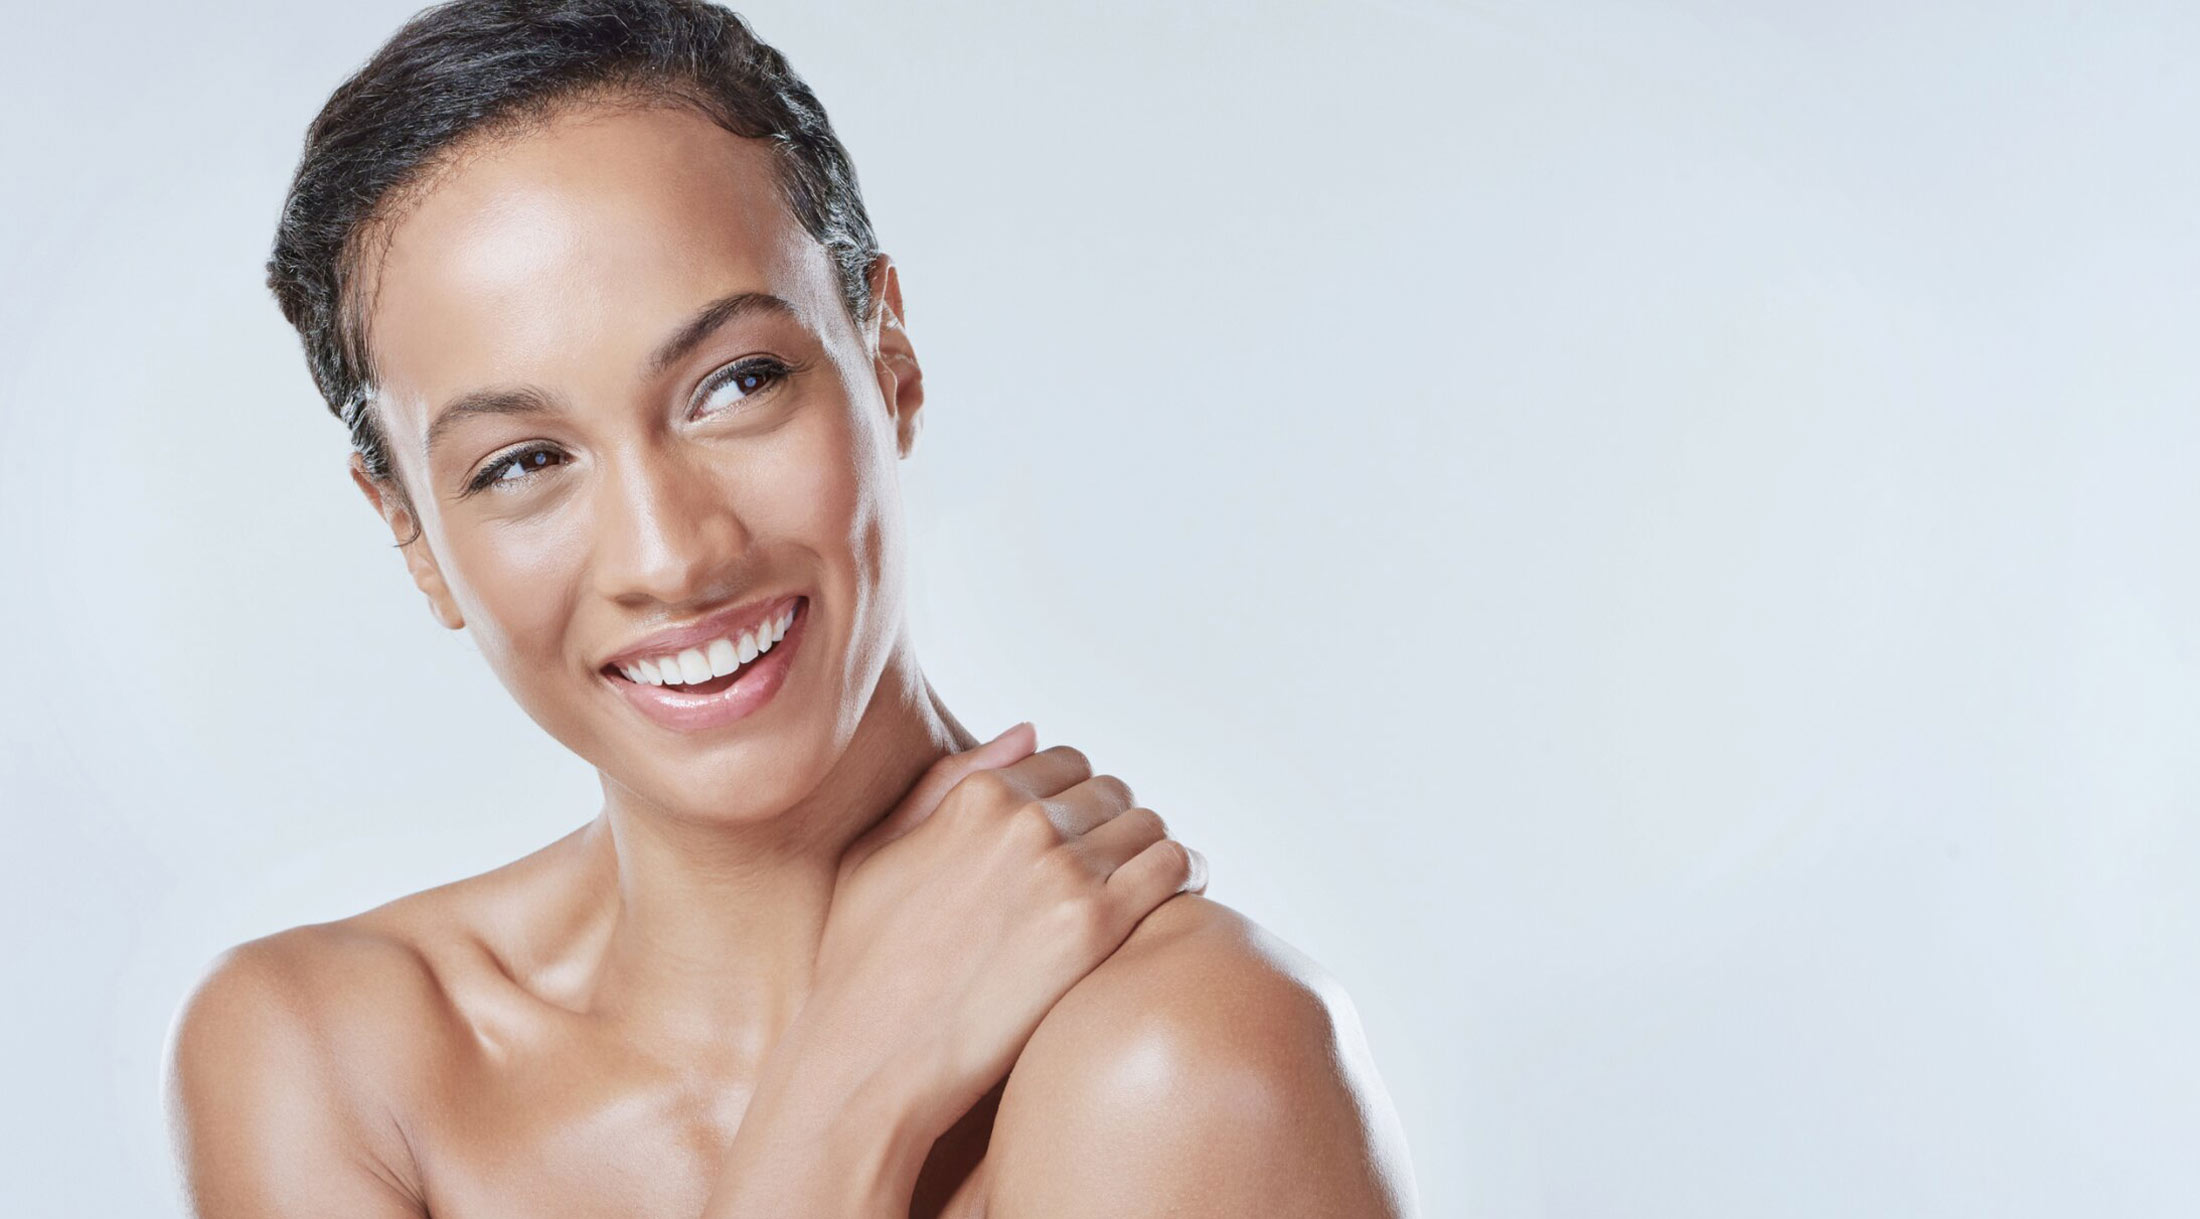 los angeles dental crowns patient model smiling and touching her shoulder